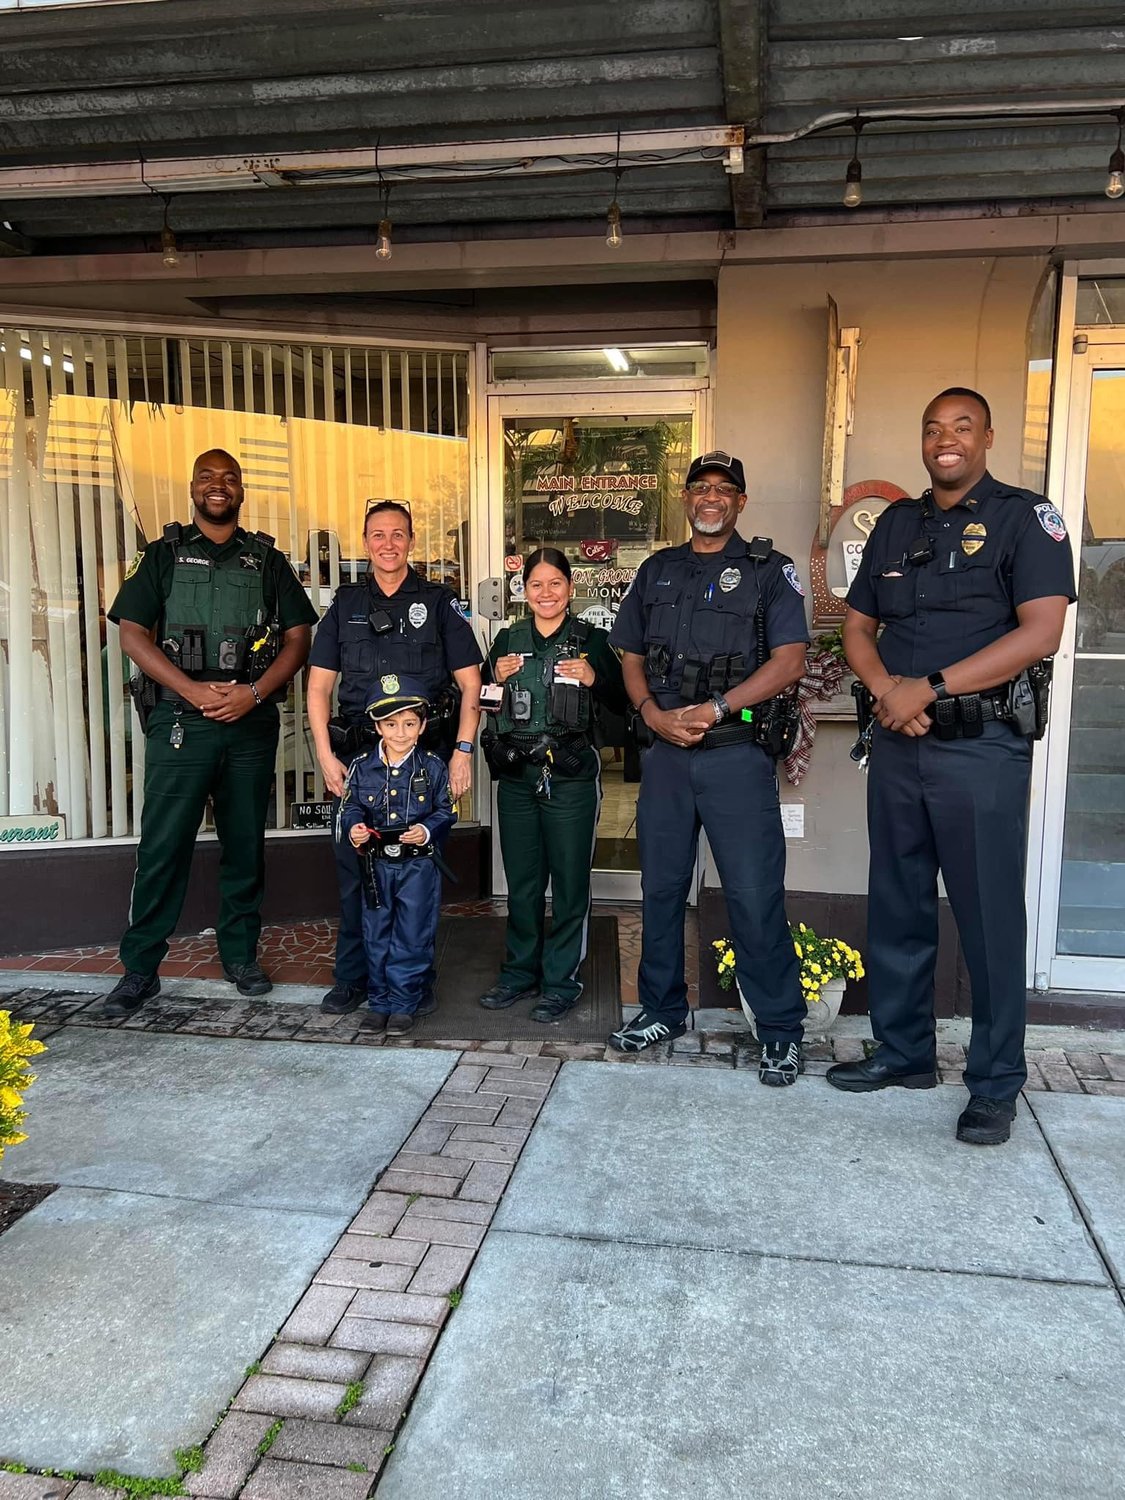 CLEWISTON  -- A Clewiston youngster asked for police to help him celebrate this birthday at Common Grounds Coffee Shop on Dec. 31 and Clewiston City Police officers were happy to make his birthday wish come true. [Courtesy photo]